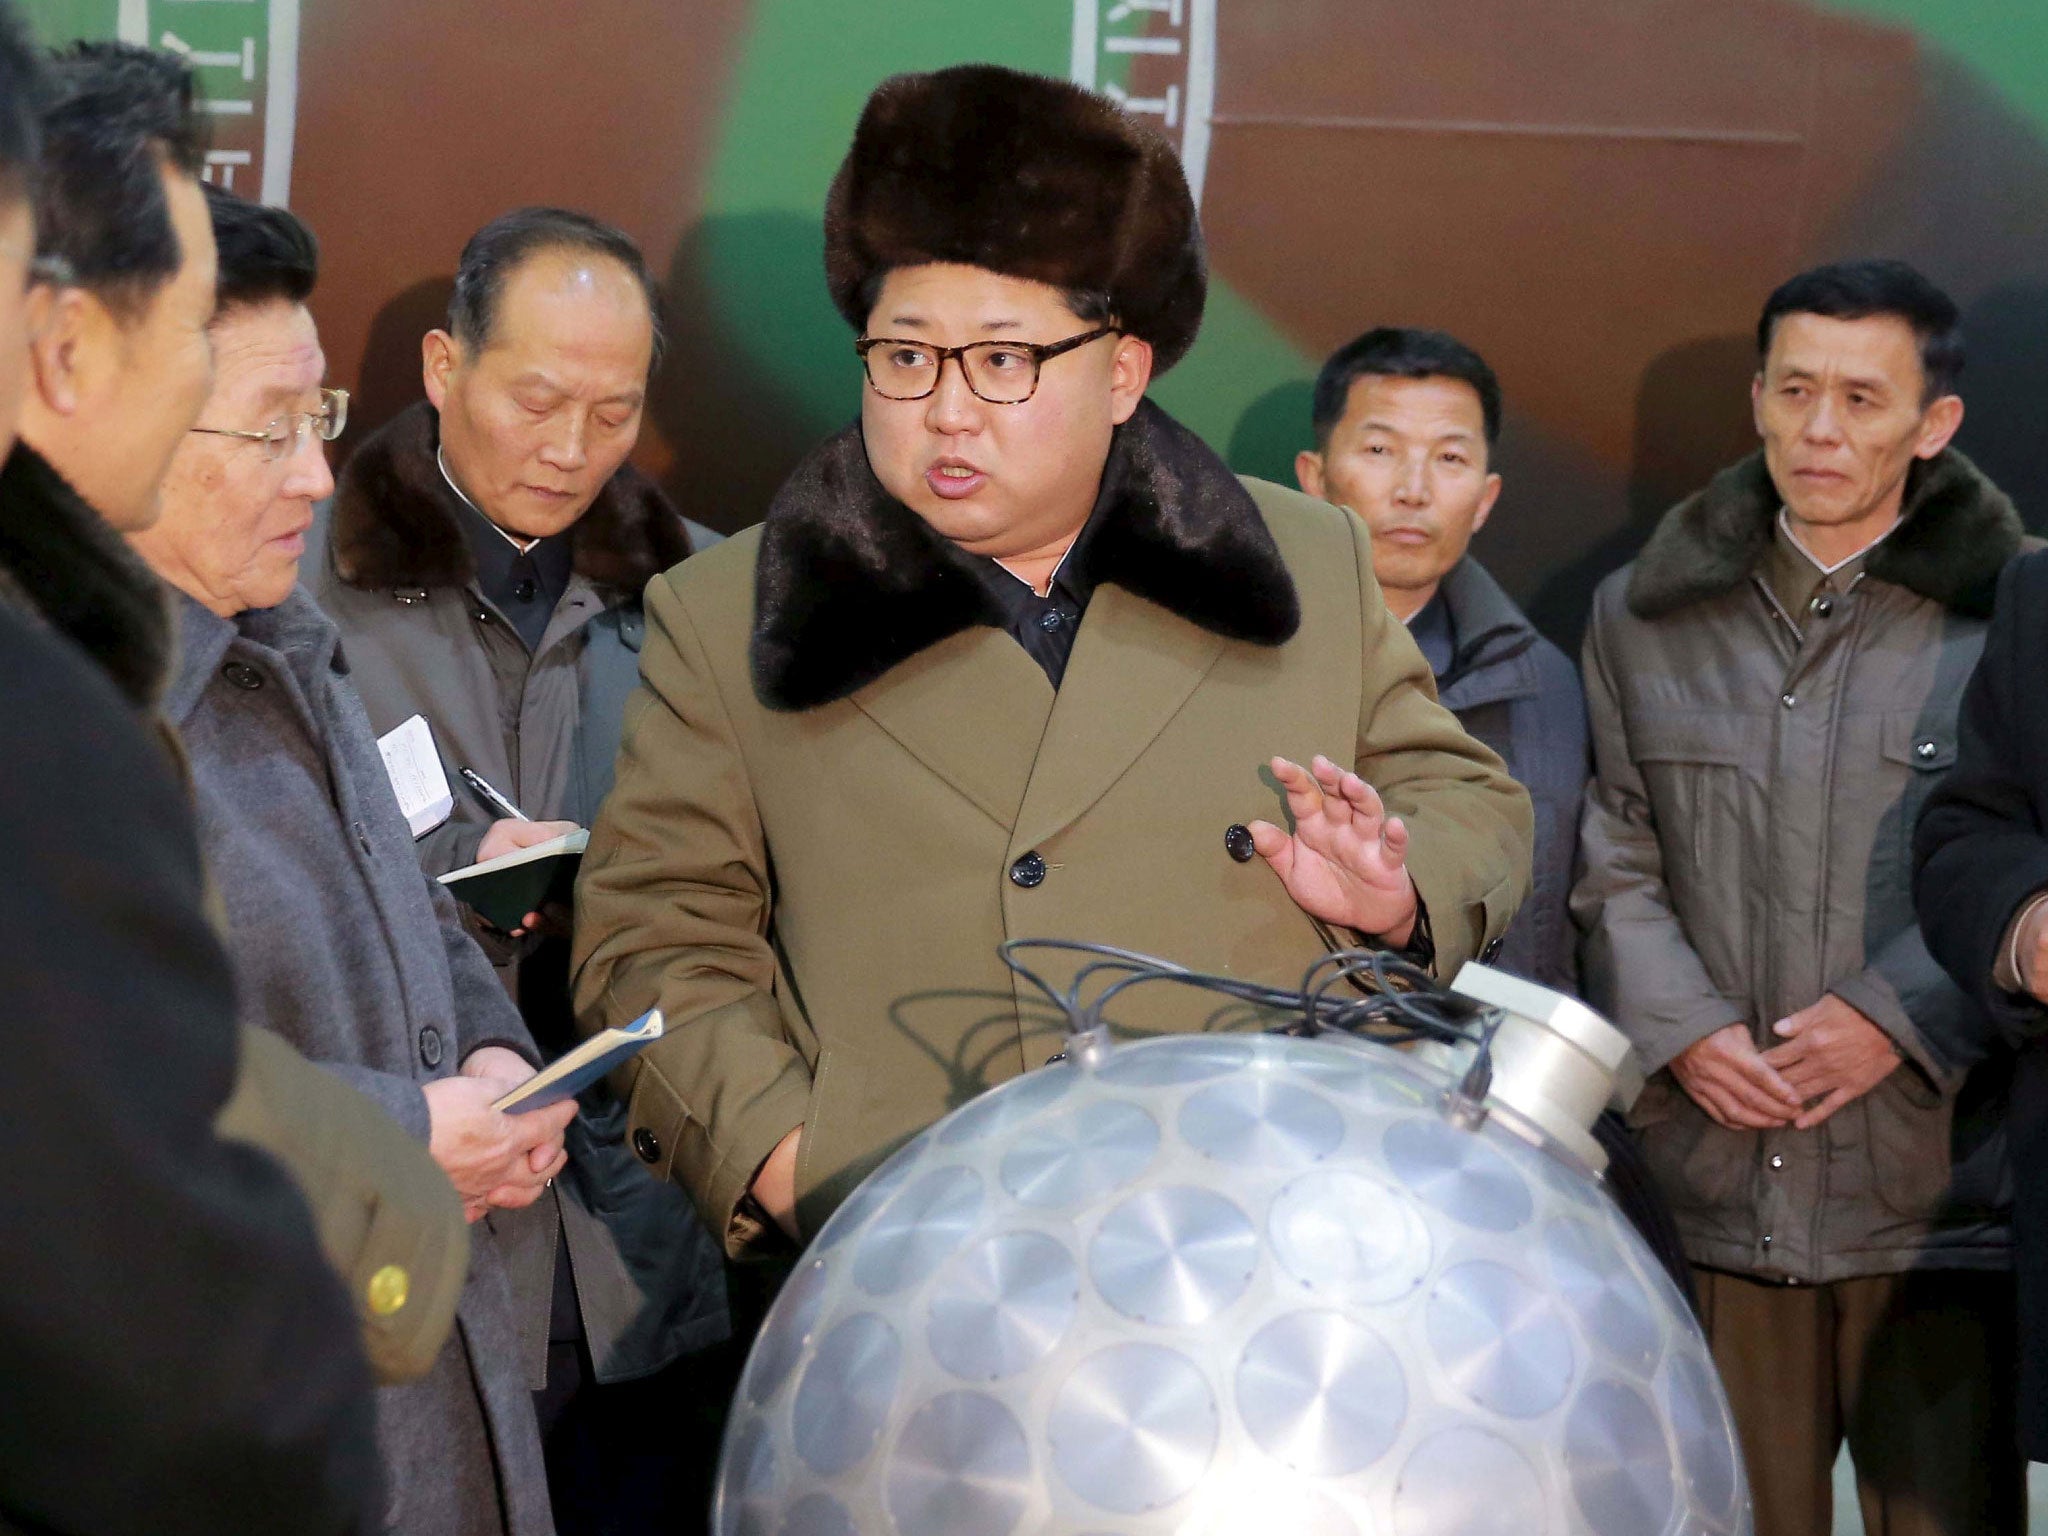 North Korean leader Kim Jong-un meets with nuclear scientists